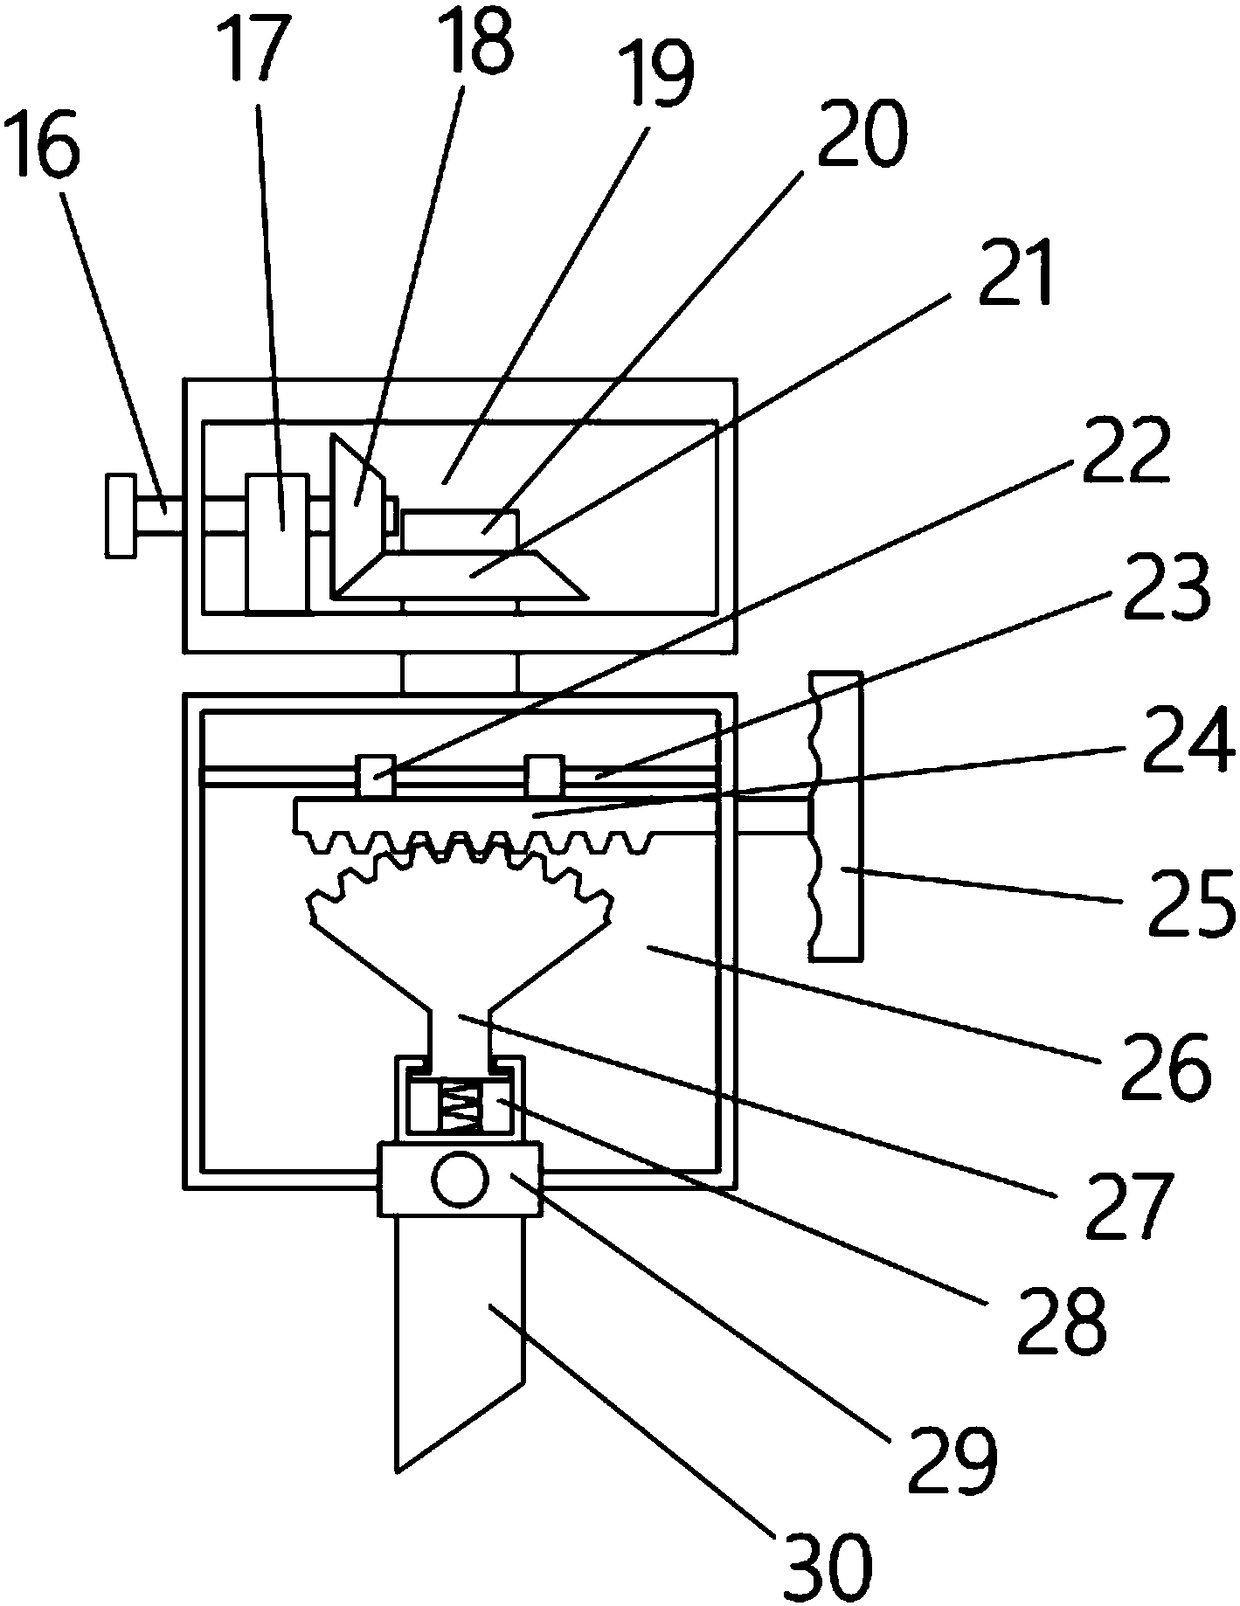 Multidirectional-adjustable type textile cloth cutting device